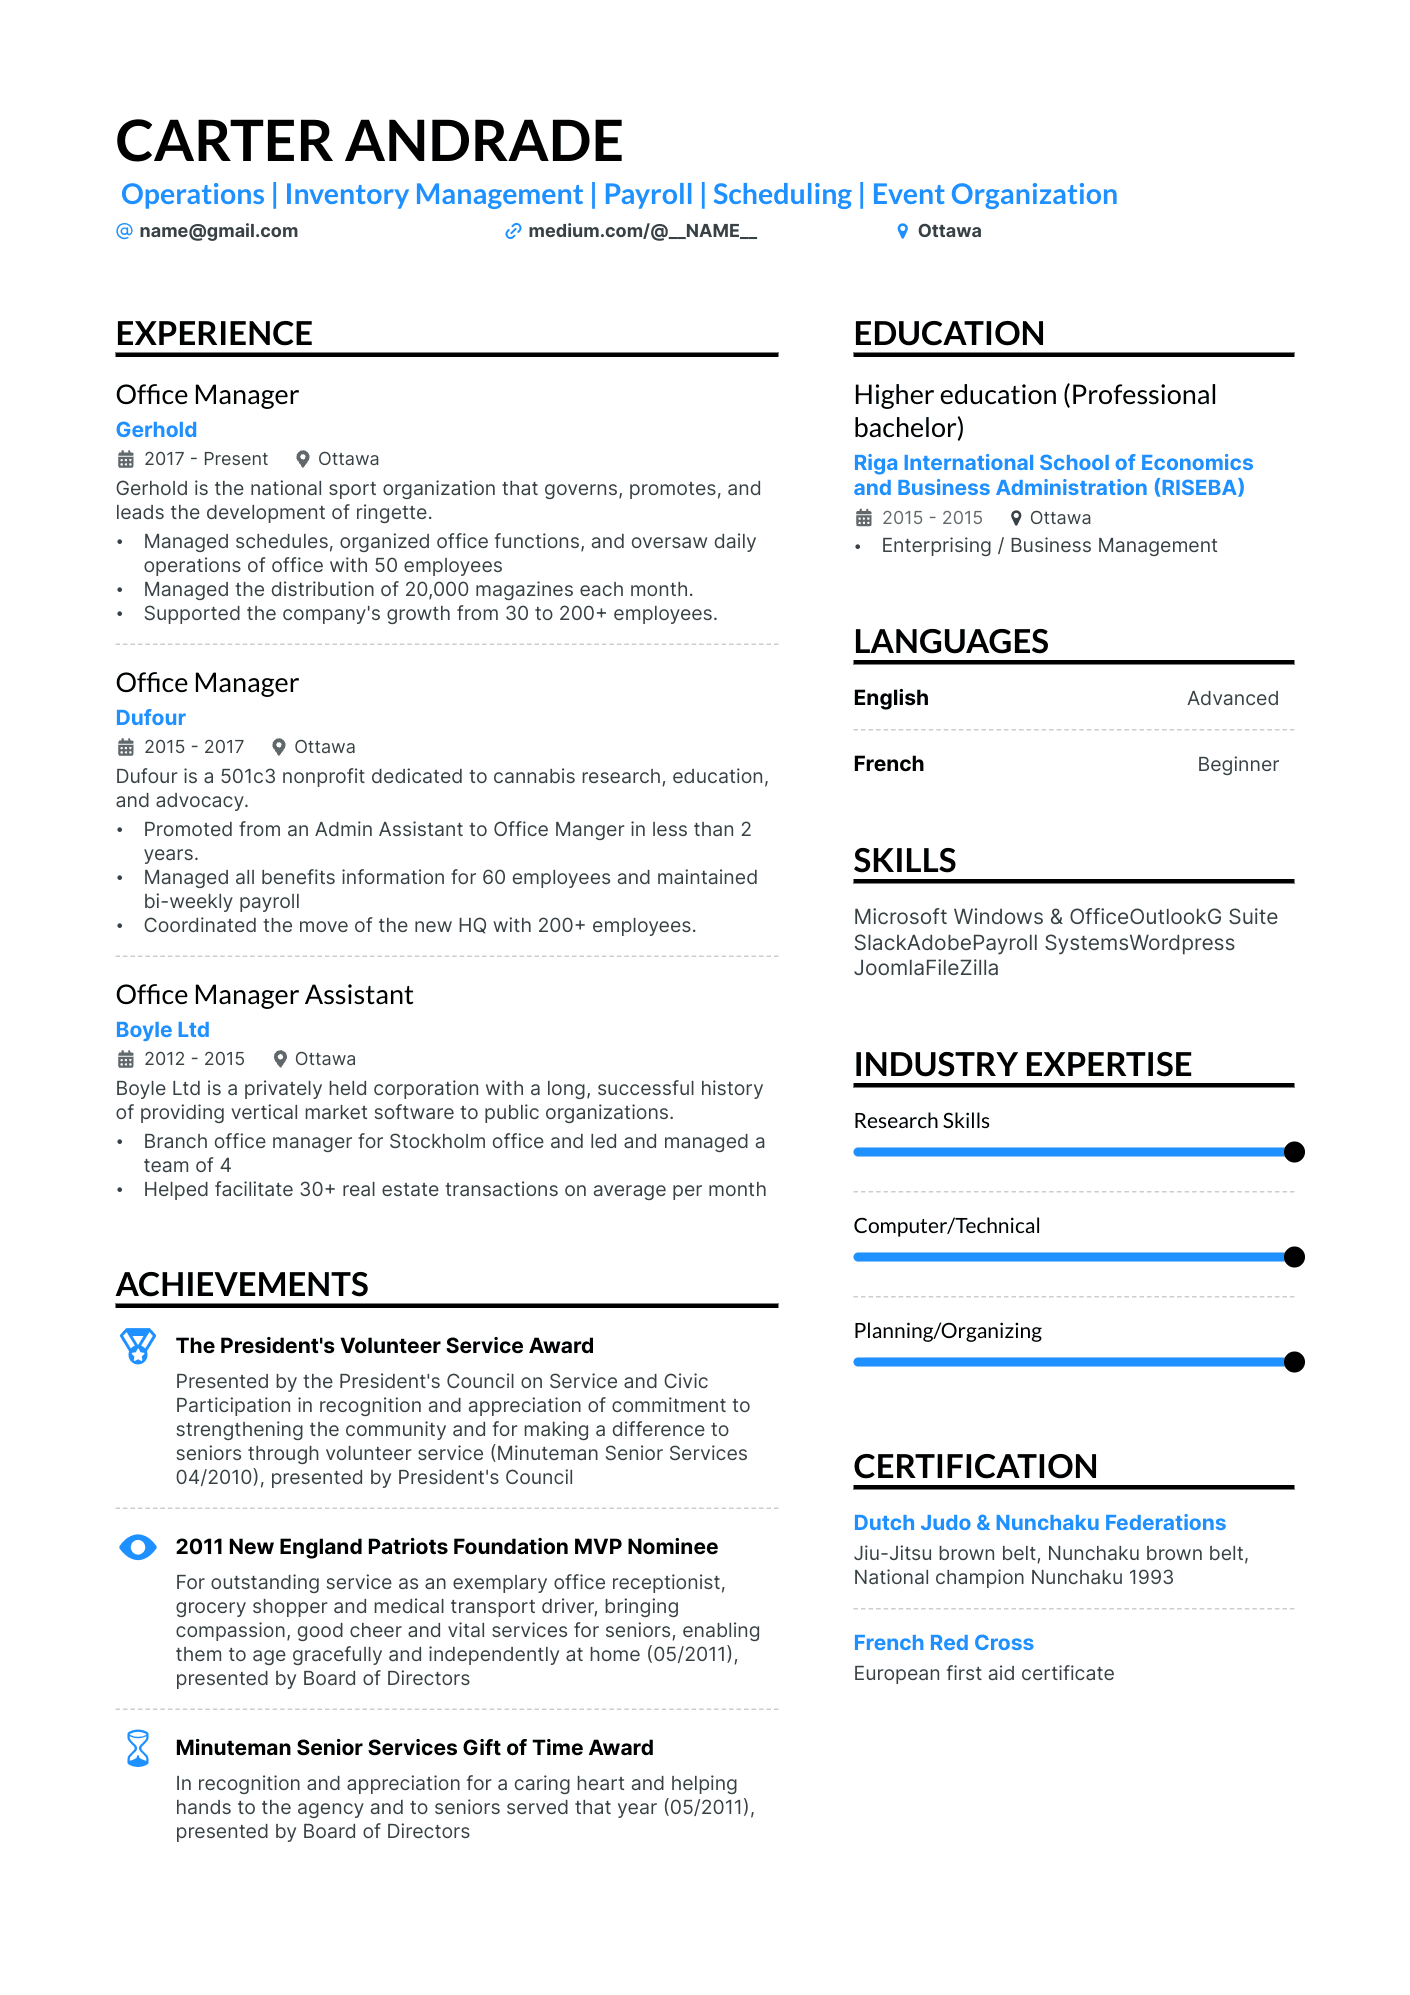 Office Manager resume example